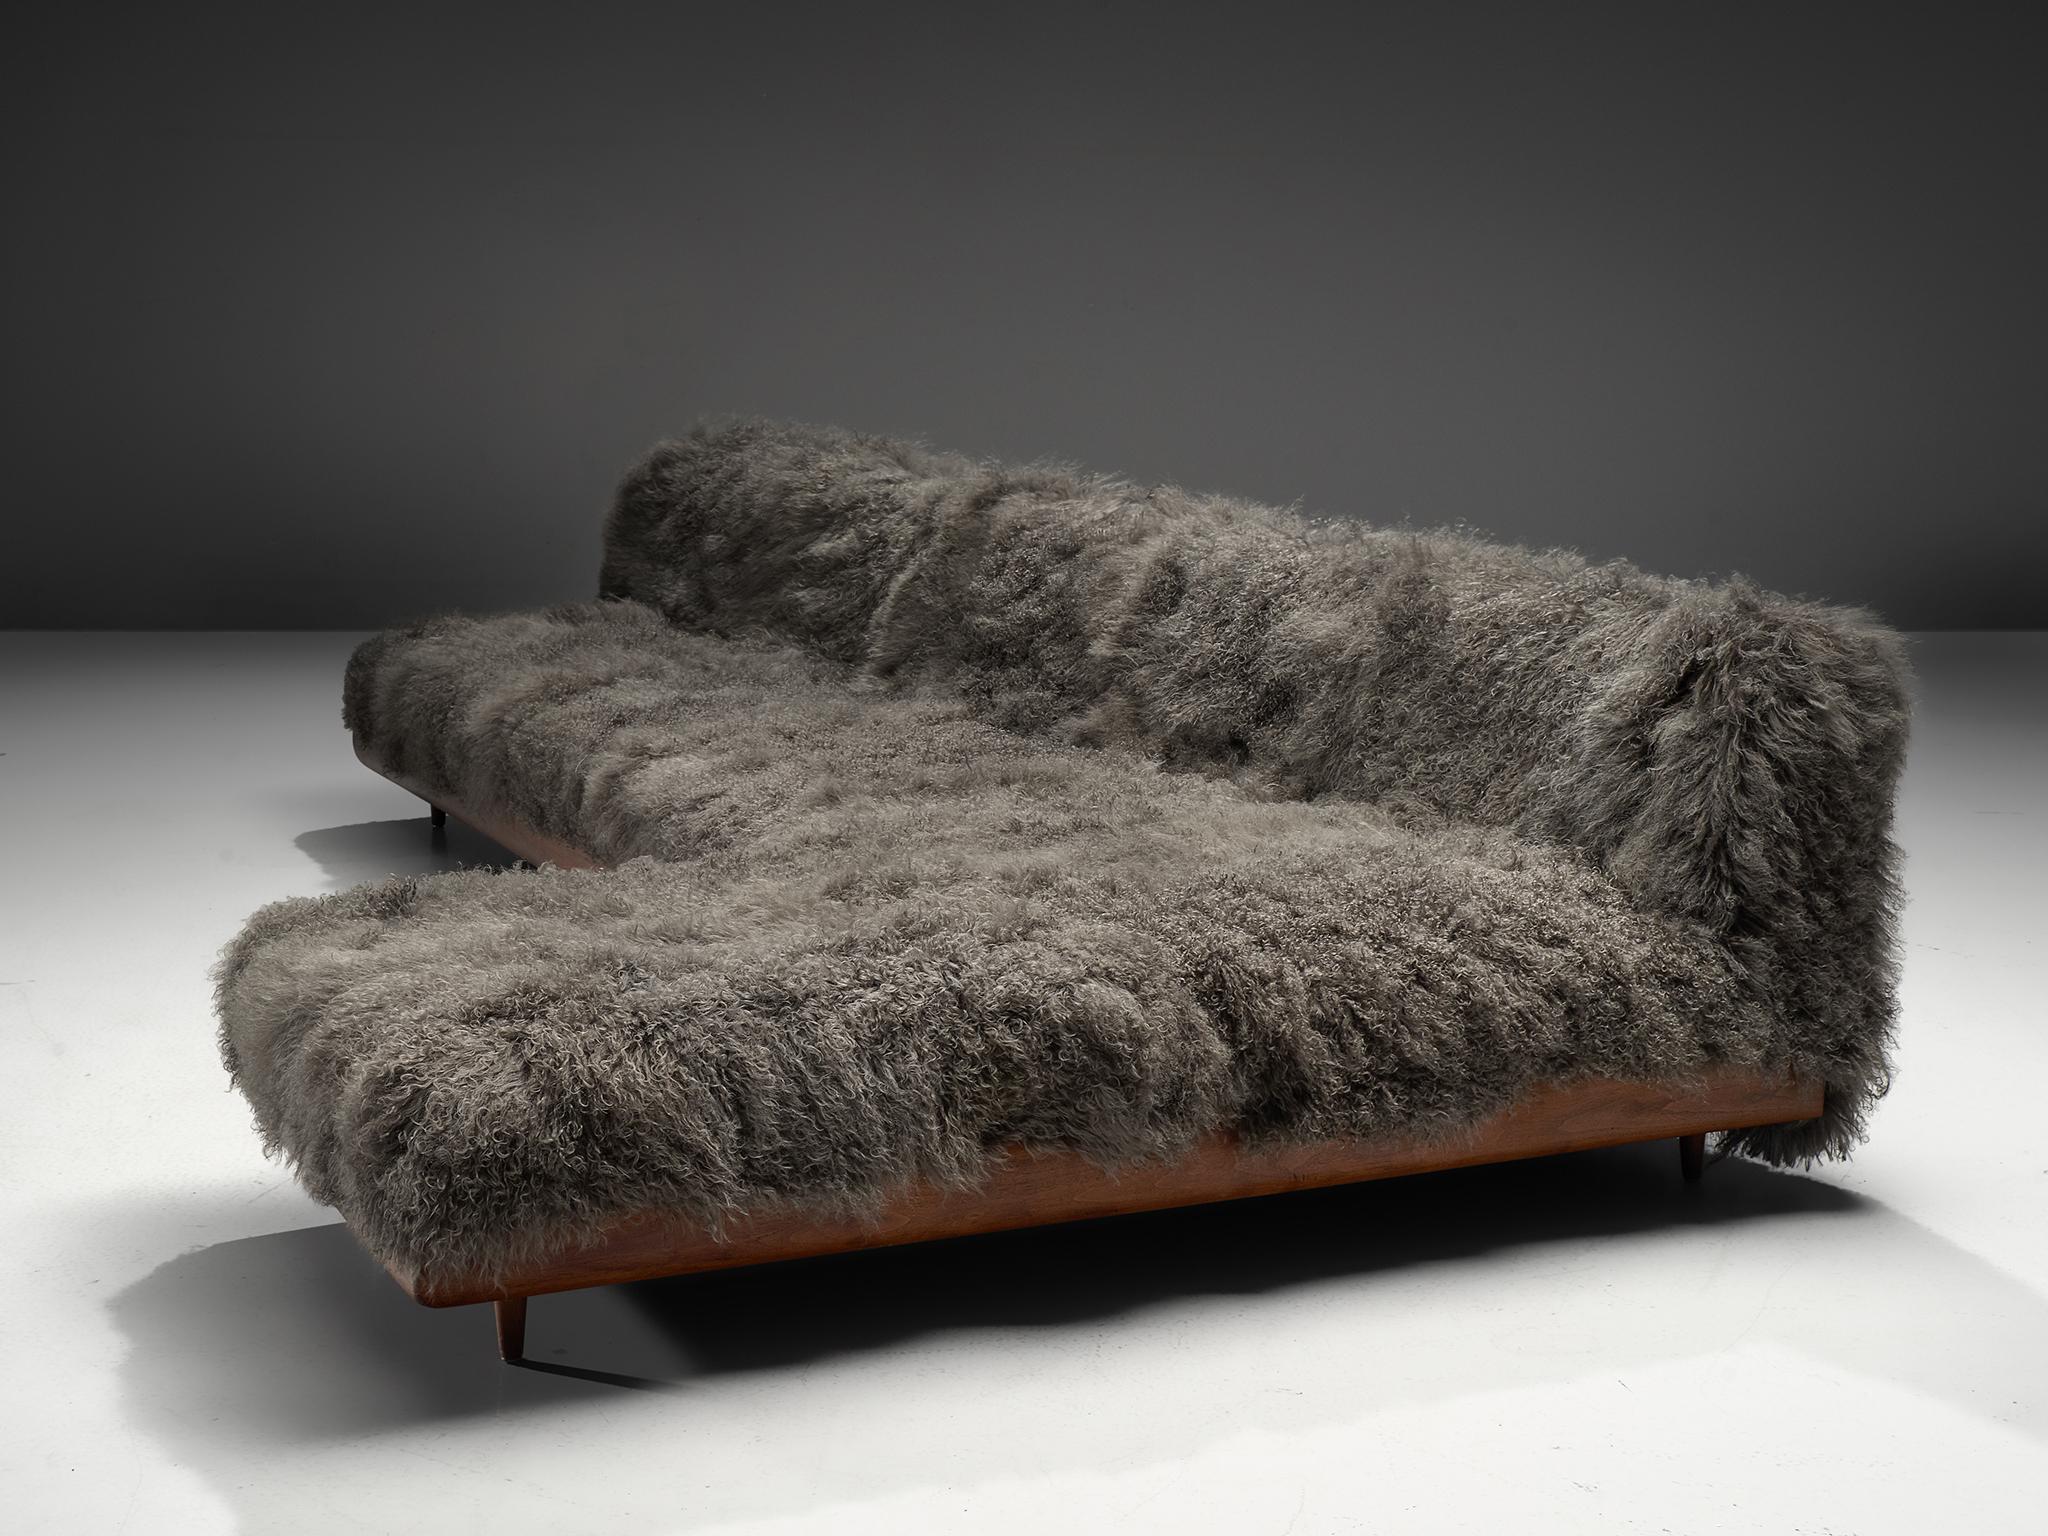 Adrian Pearsall, 'Boomerang' sofa, in grey Tibetan wool and walnut, United States, 1960s

This boomerang sofa has a unique shape with sinuous lines which create a monumental and inviting look. The sofa is a great addition to a living area or